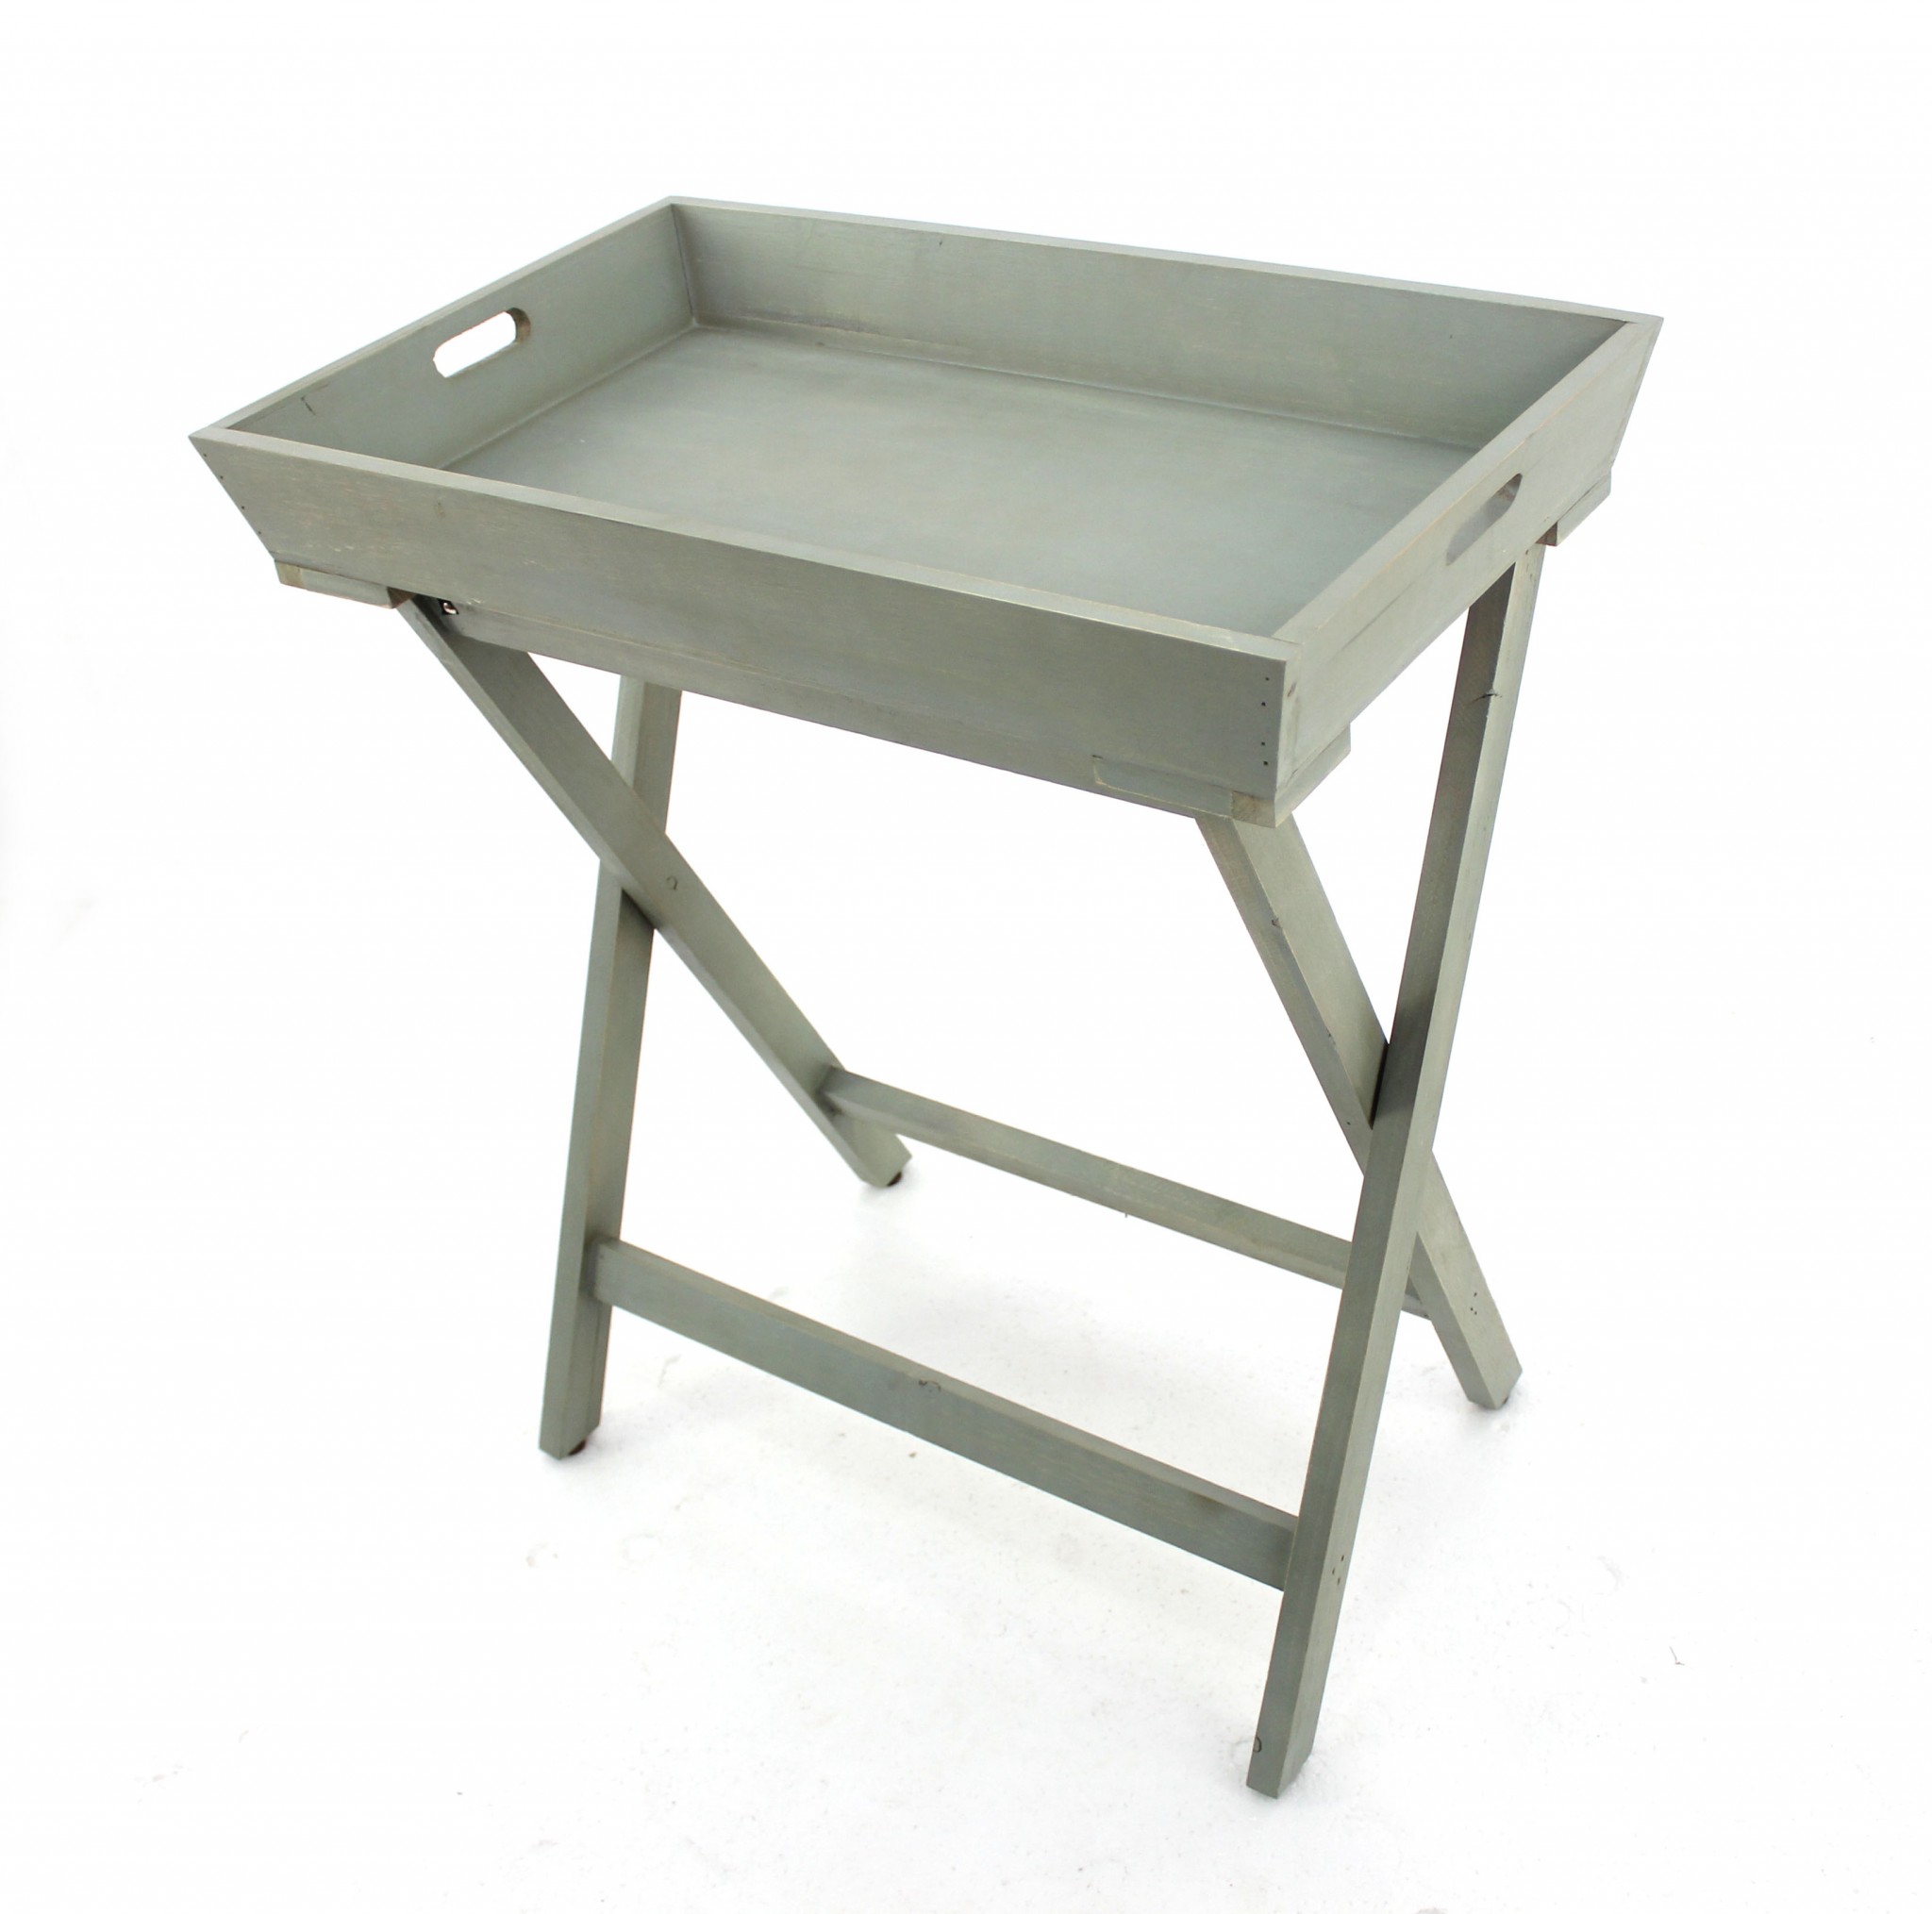 15.5" x 26" x 30" Gray/Light Blue, Wooden - Serving Table